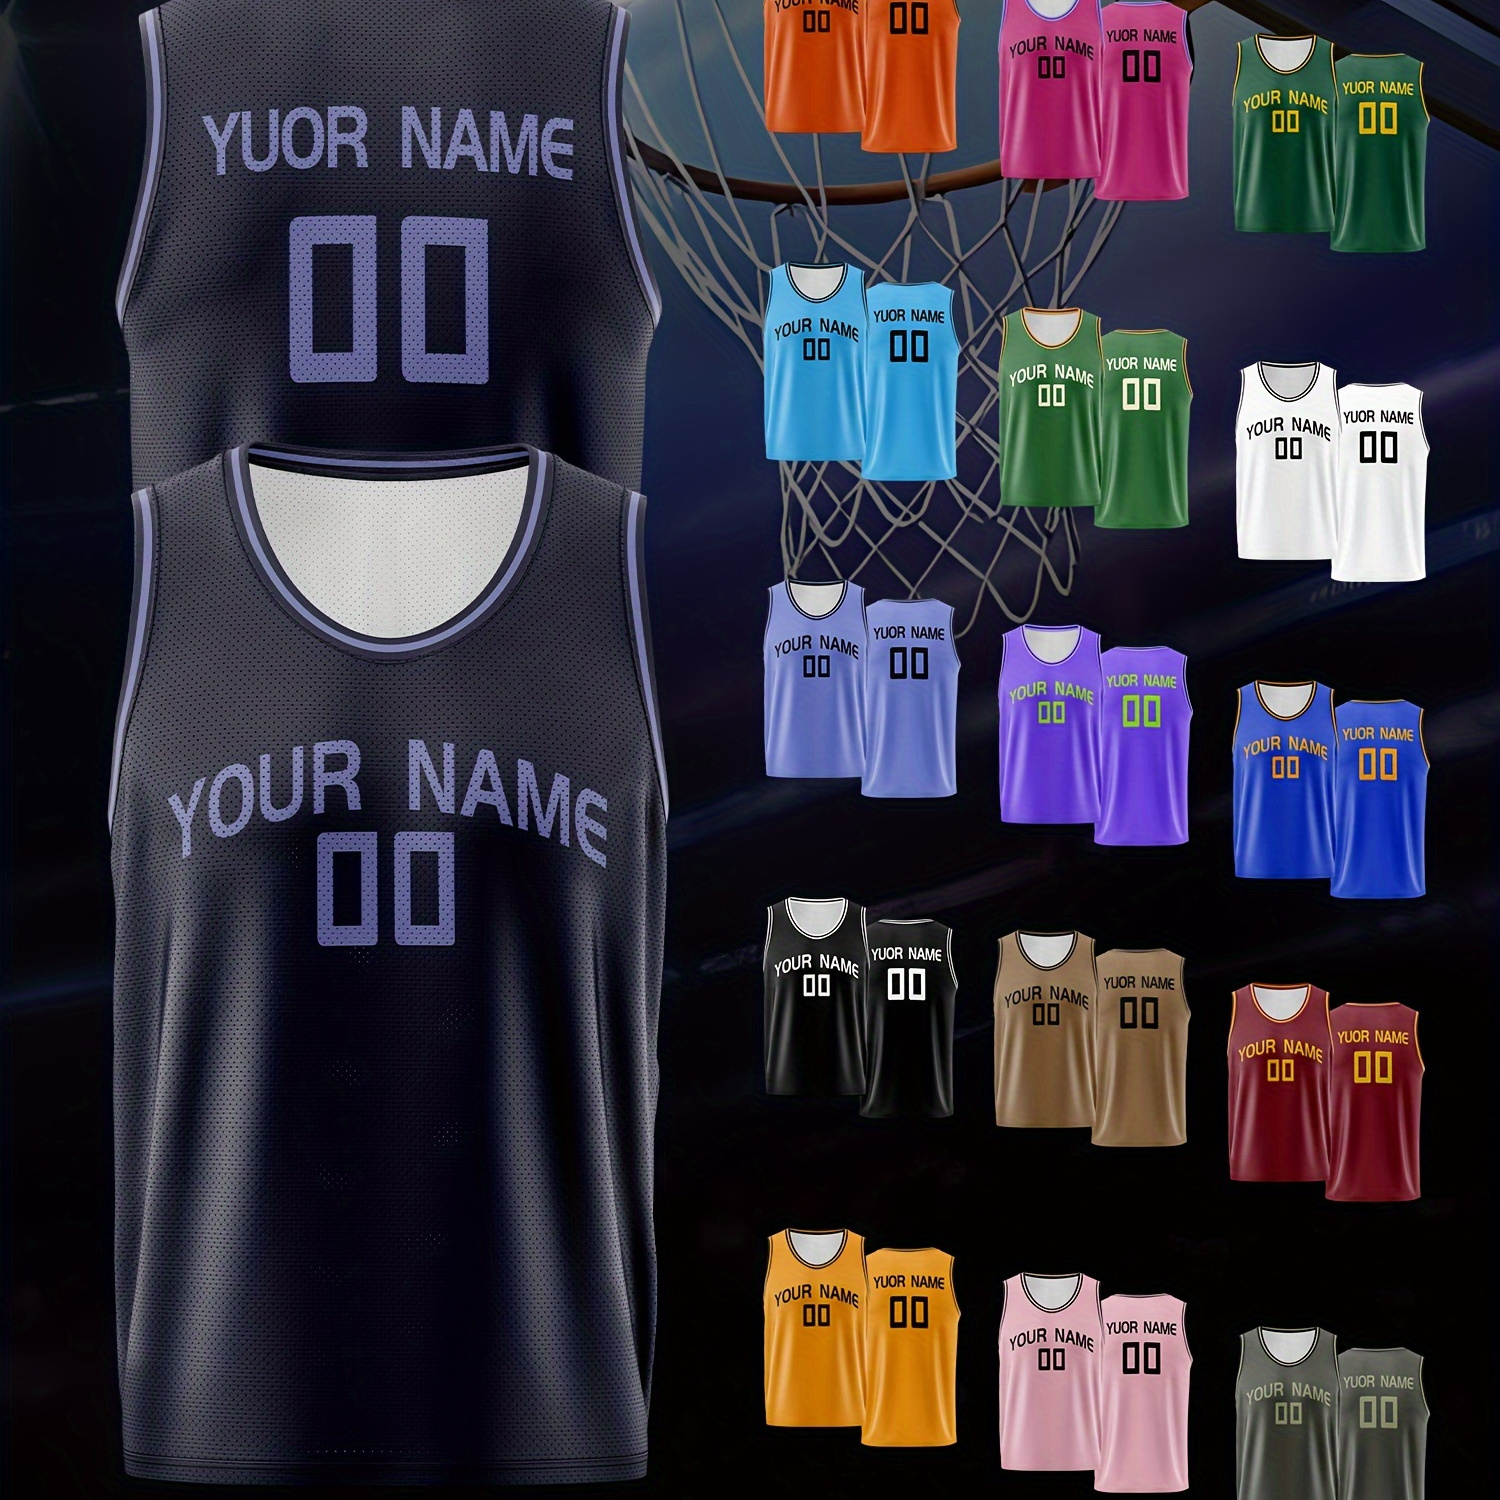 

Men's Basketball Tank Top, Customized Letter & Number Embroidery Sports Top, Breathable Sports Uniform For Training And Competition